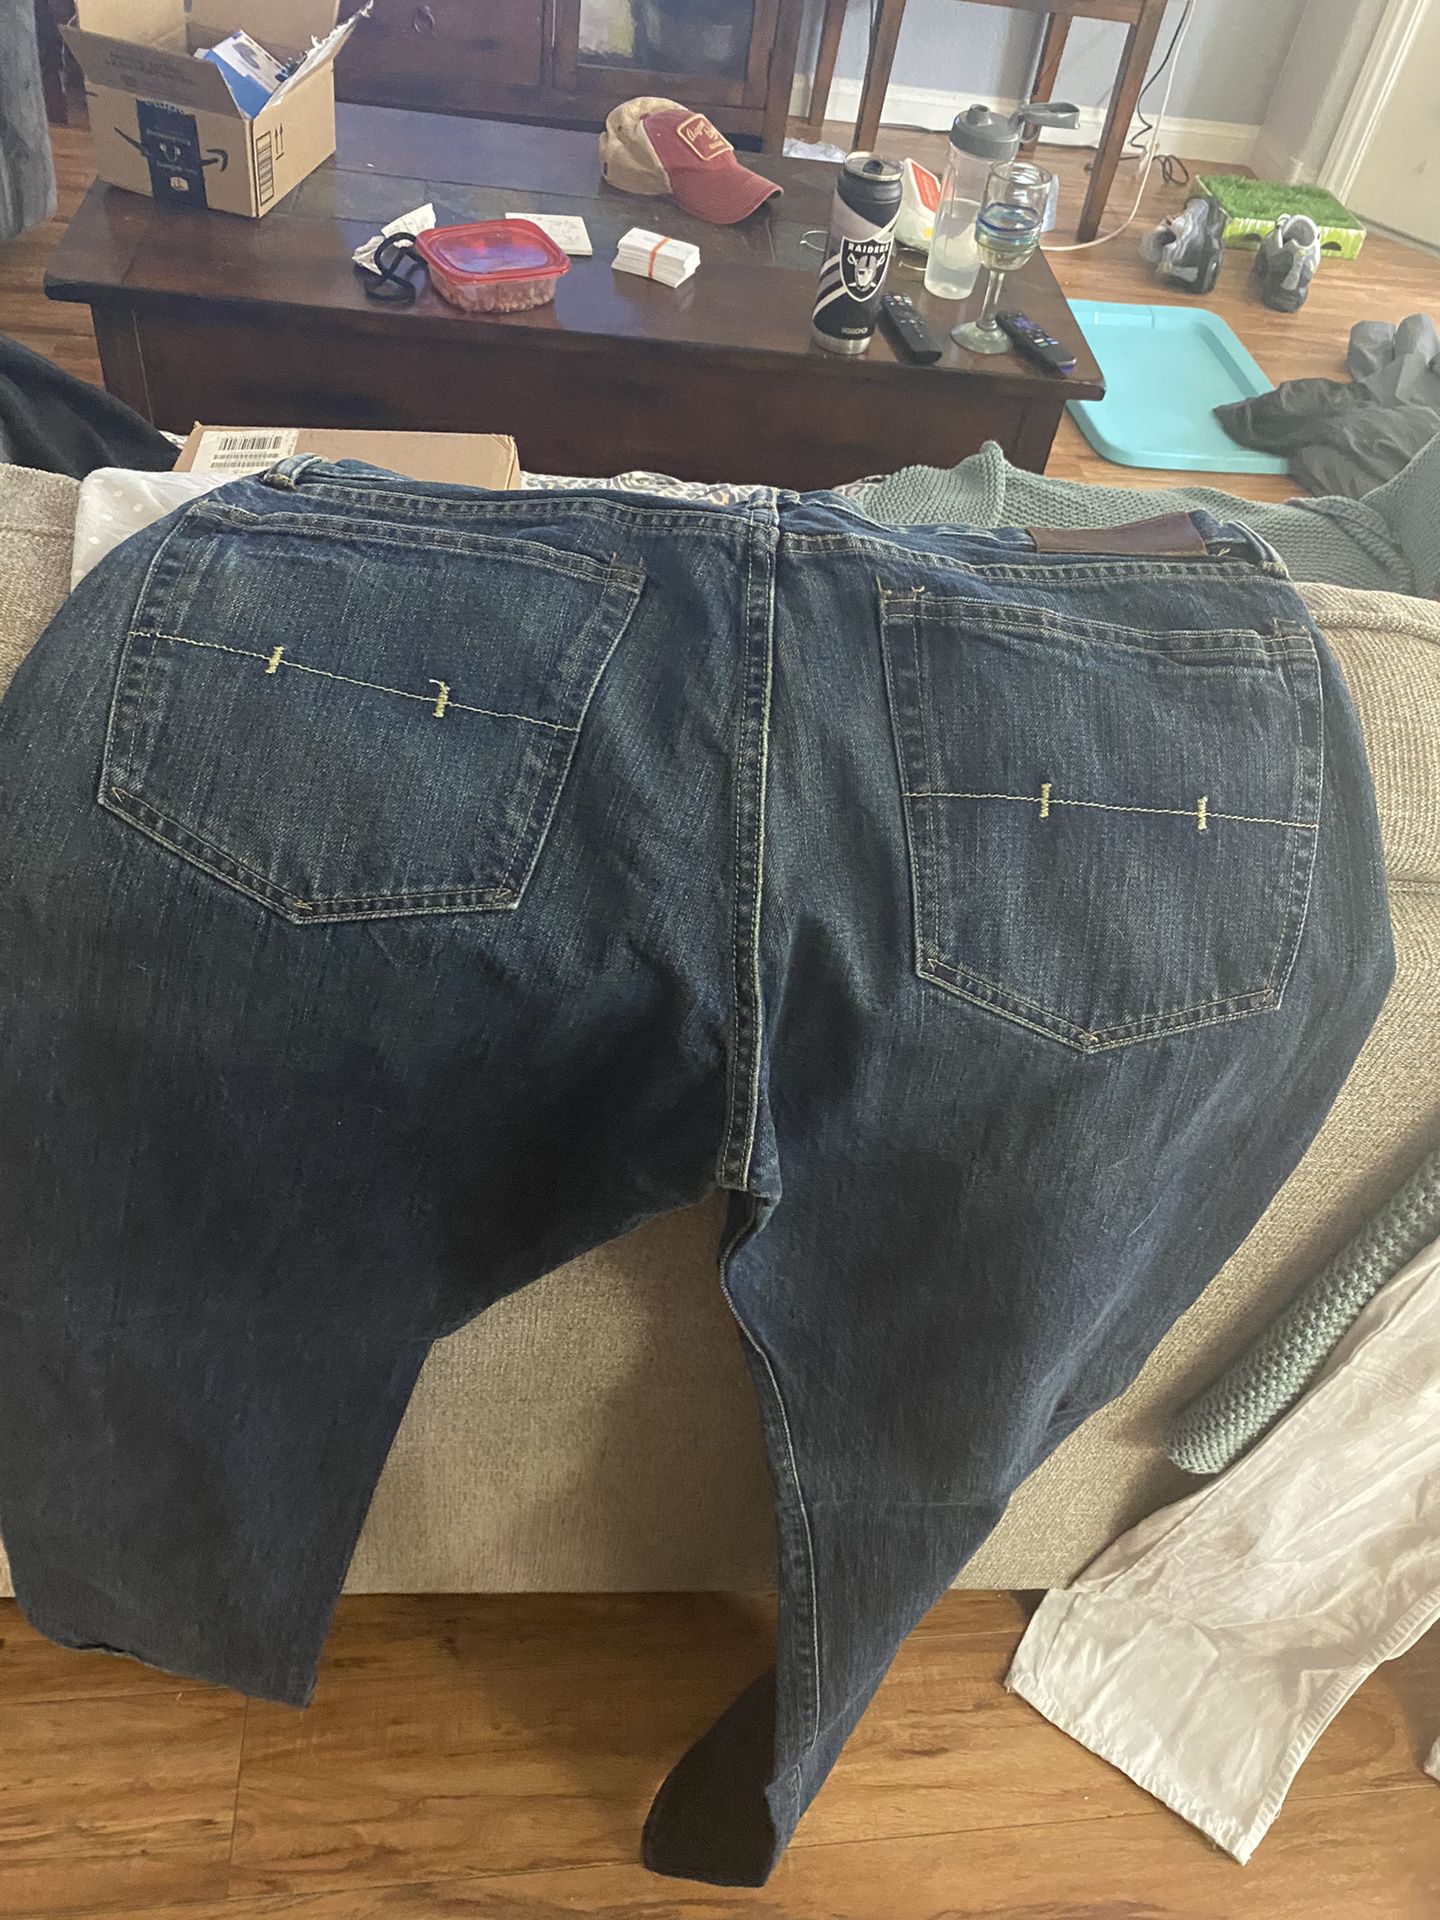 5 Pairs Of Men’s Jeans Big And tall 